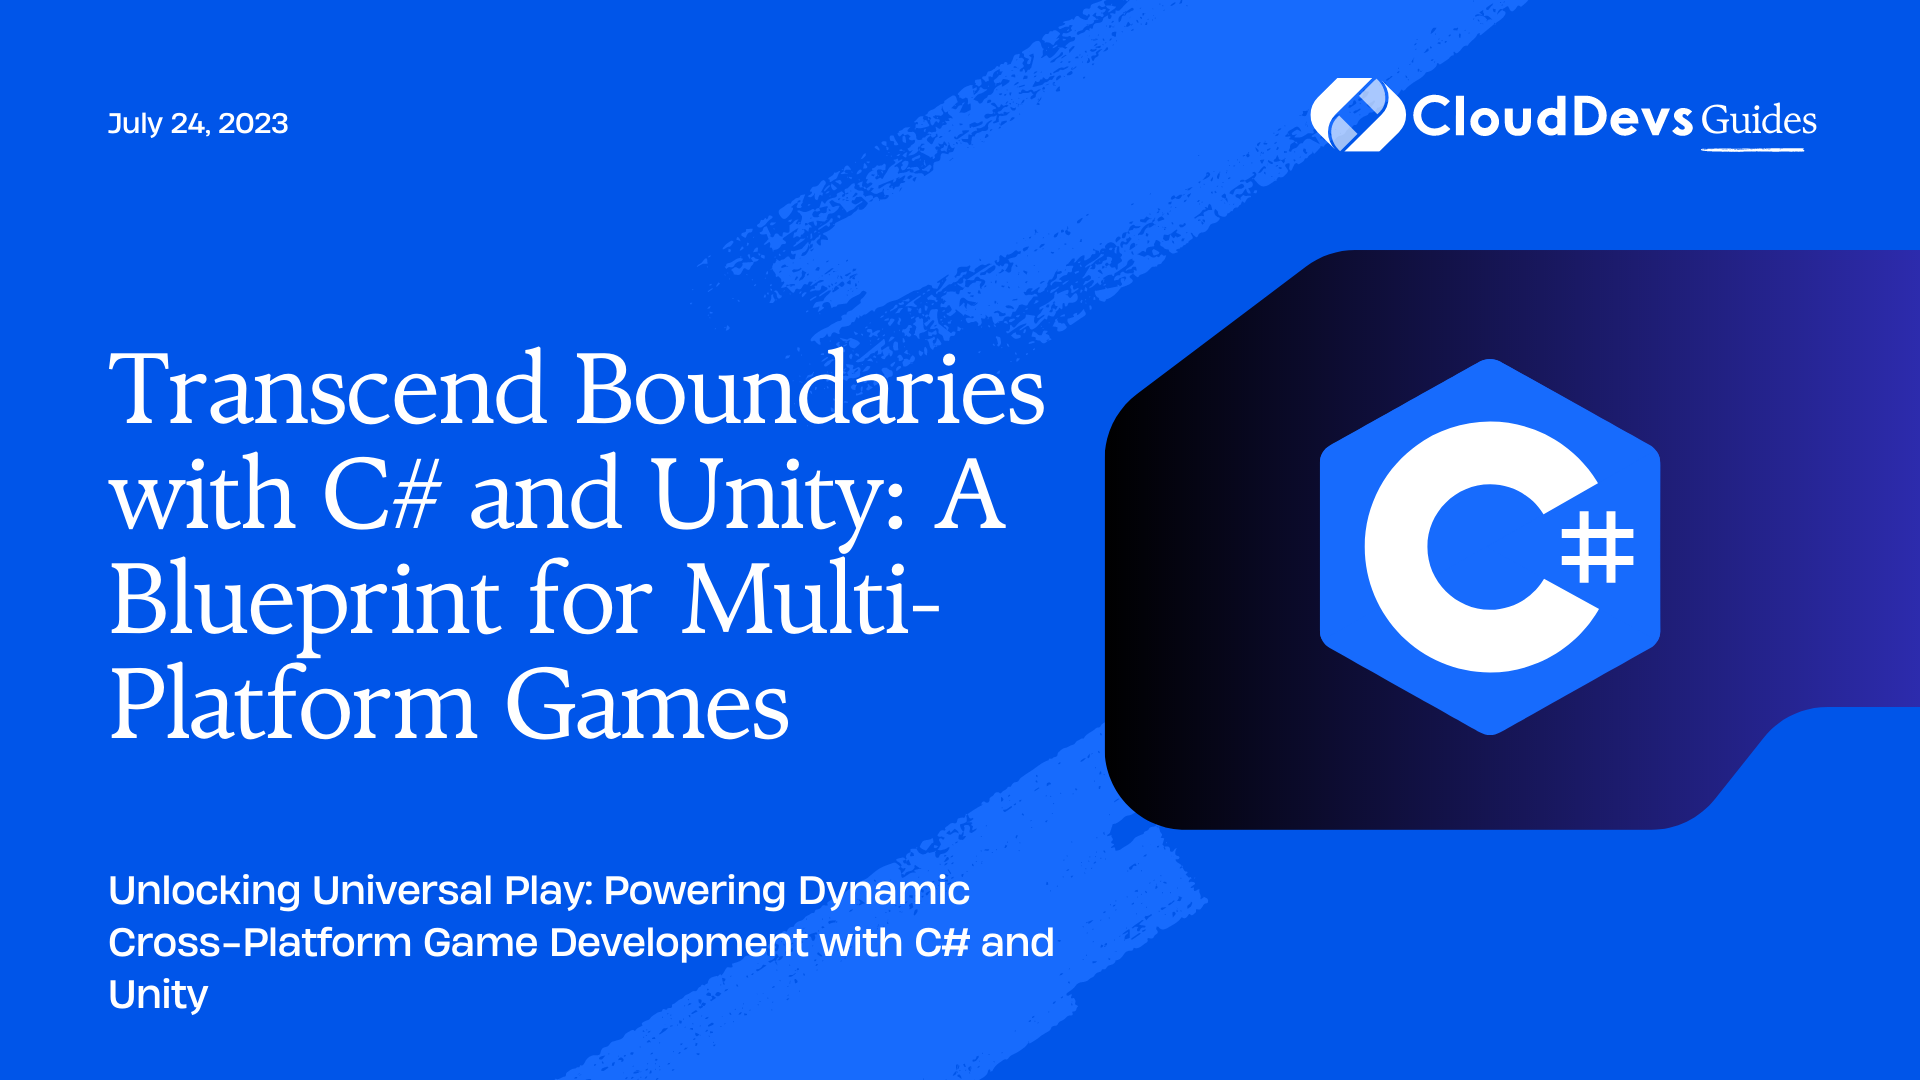 Transcend Boundaries with C# and Unity: A Blueprint for Multi-Platform Games